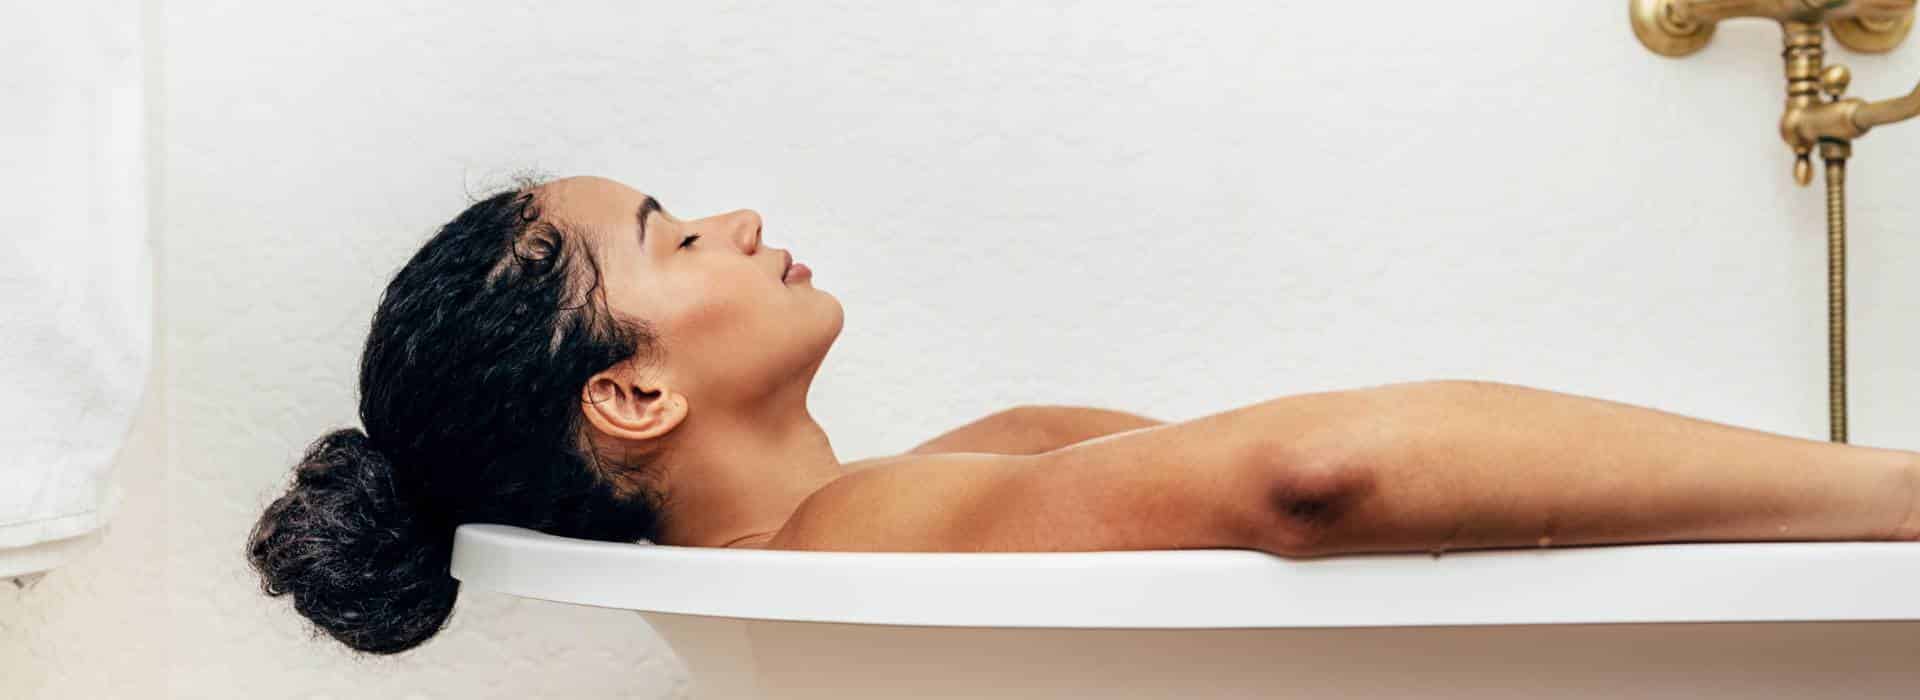 Woman relaxing in bath | 9 Different Ways to Use Shine Body & Bath Products | Blog